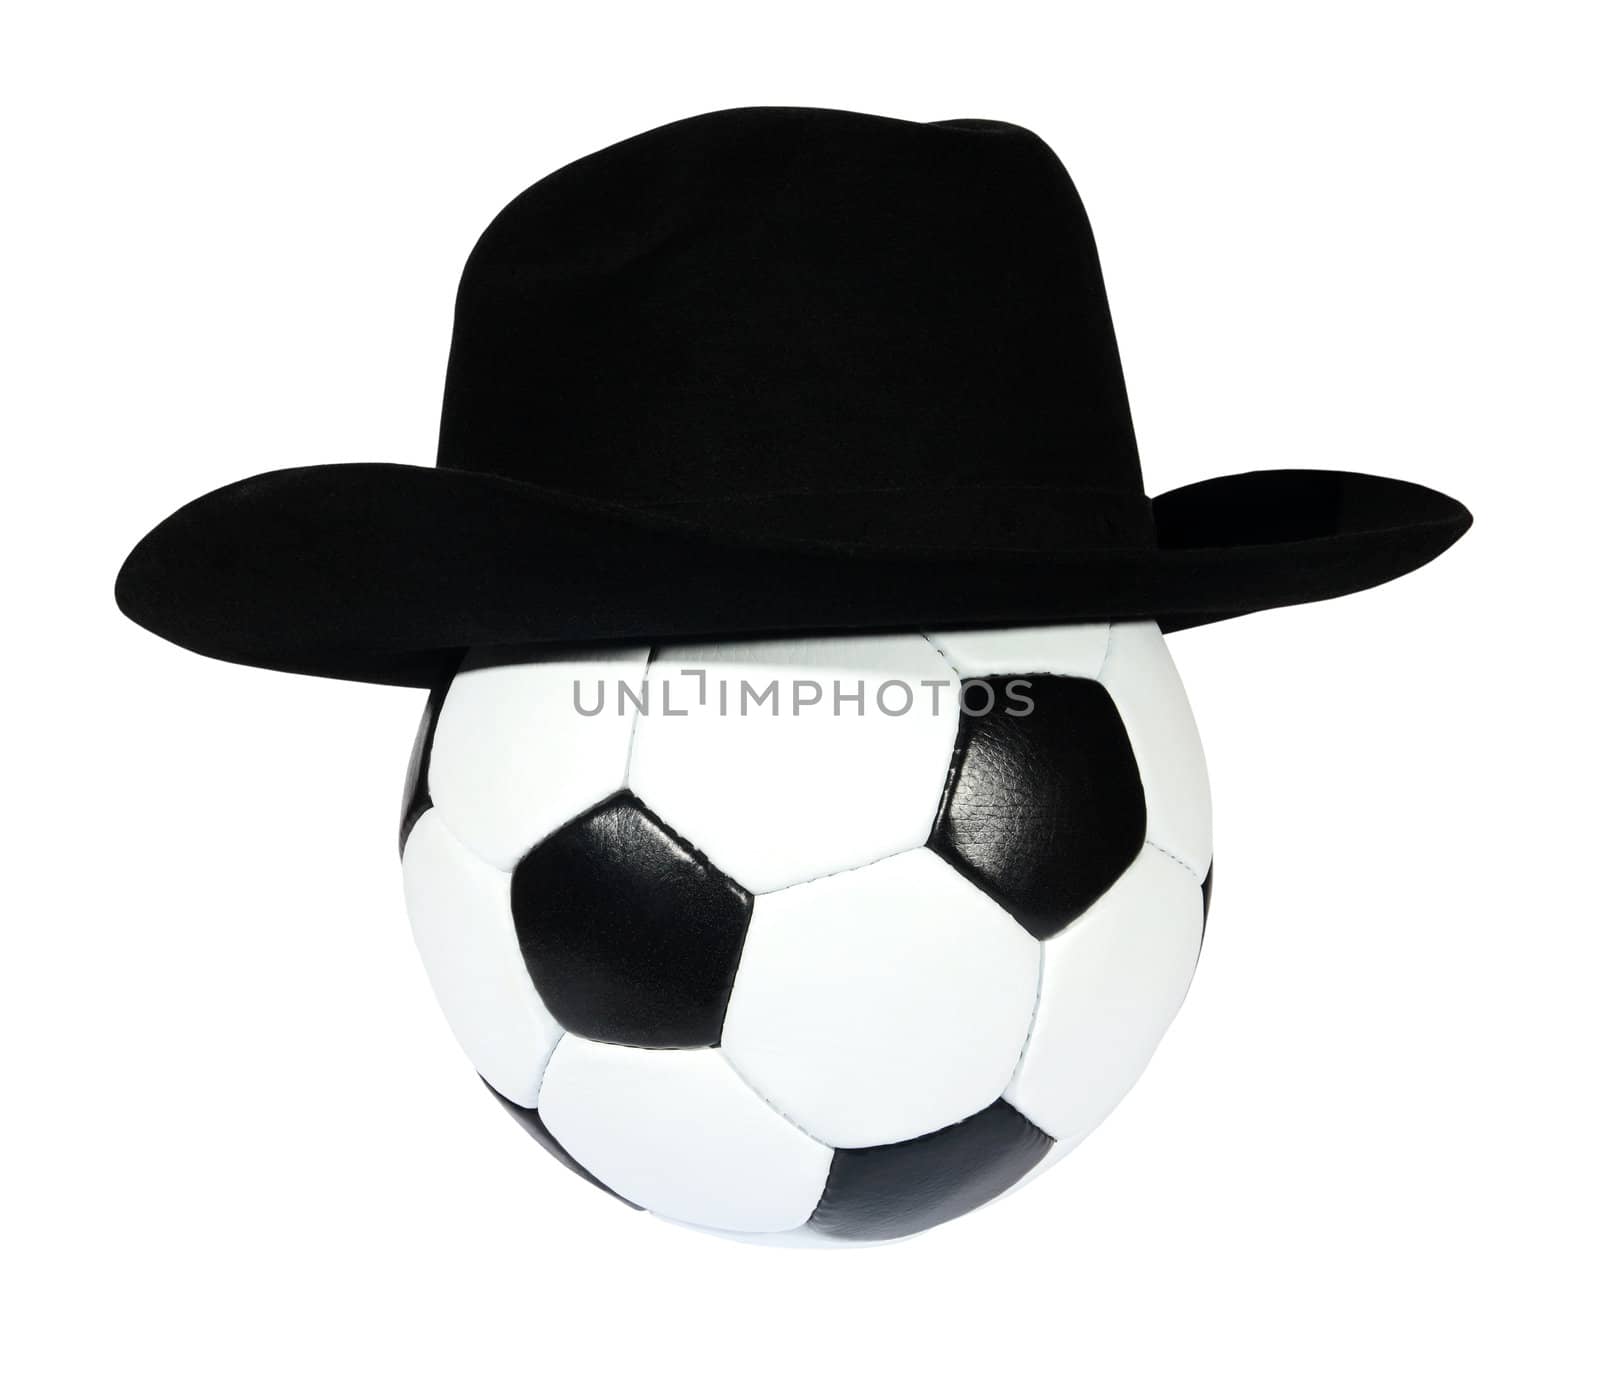 black and white Soccer ball in a black hat by aptyp_kok